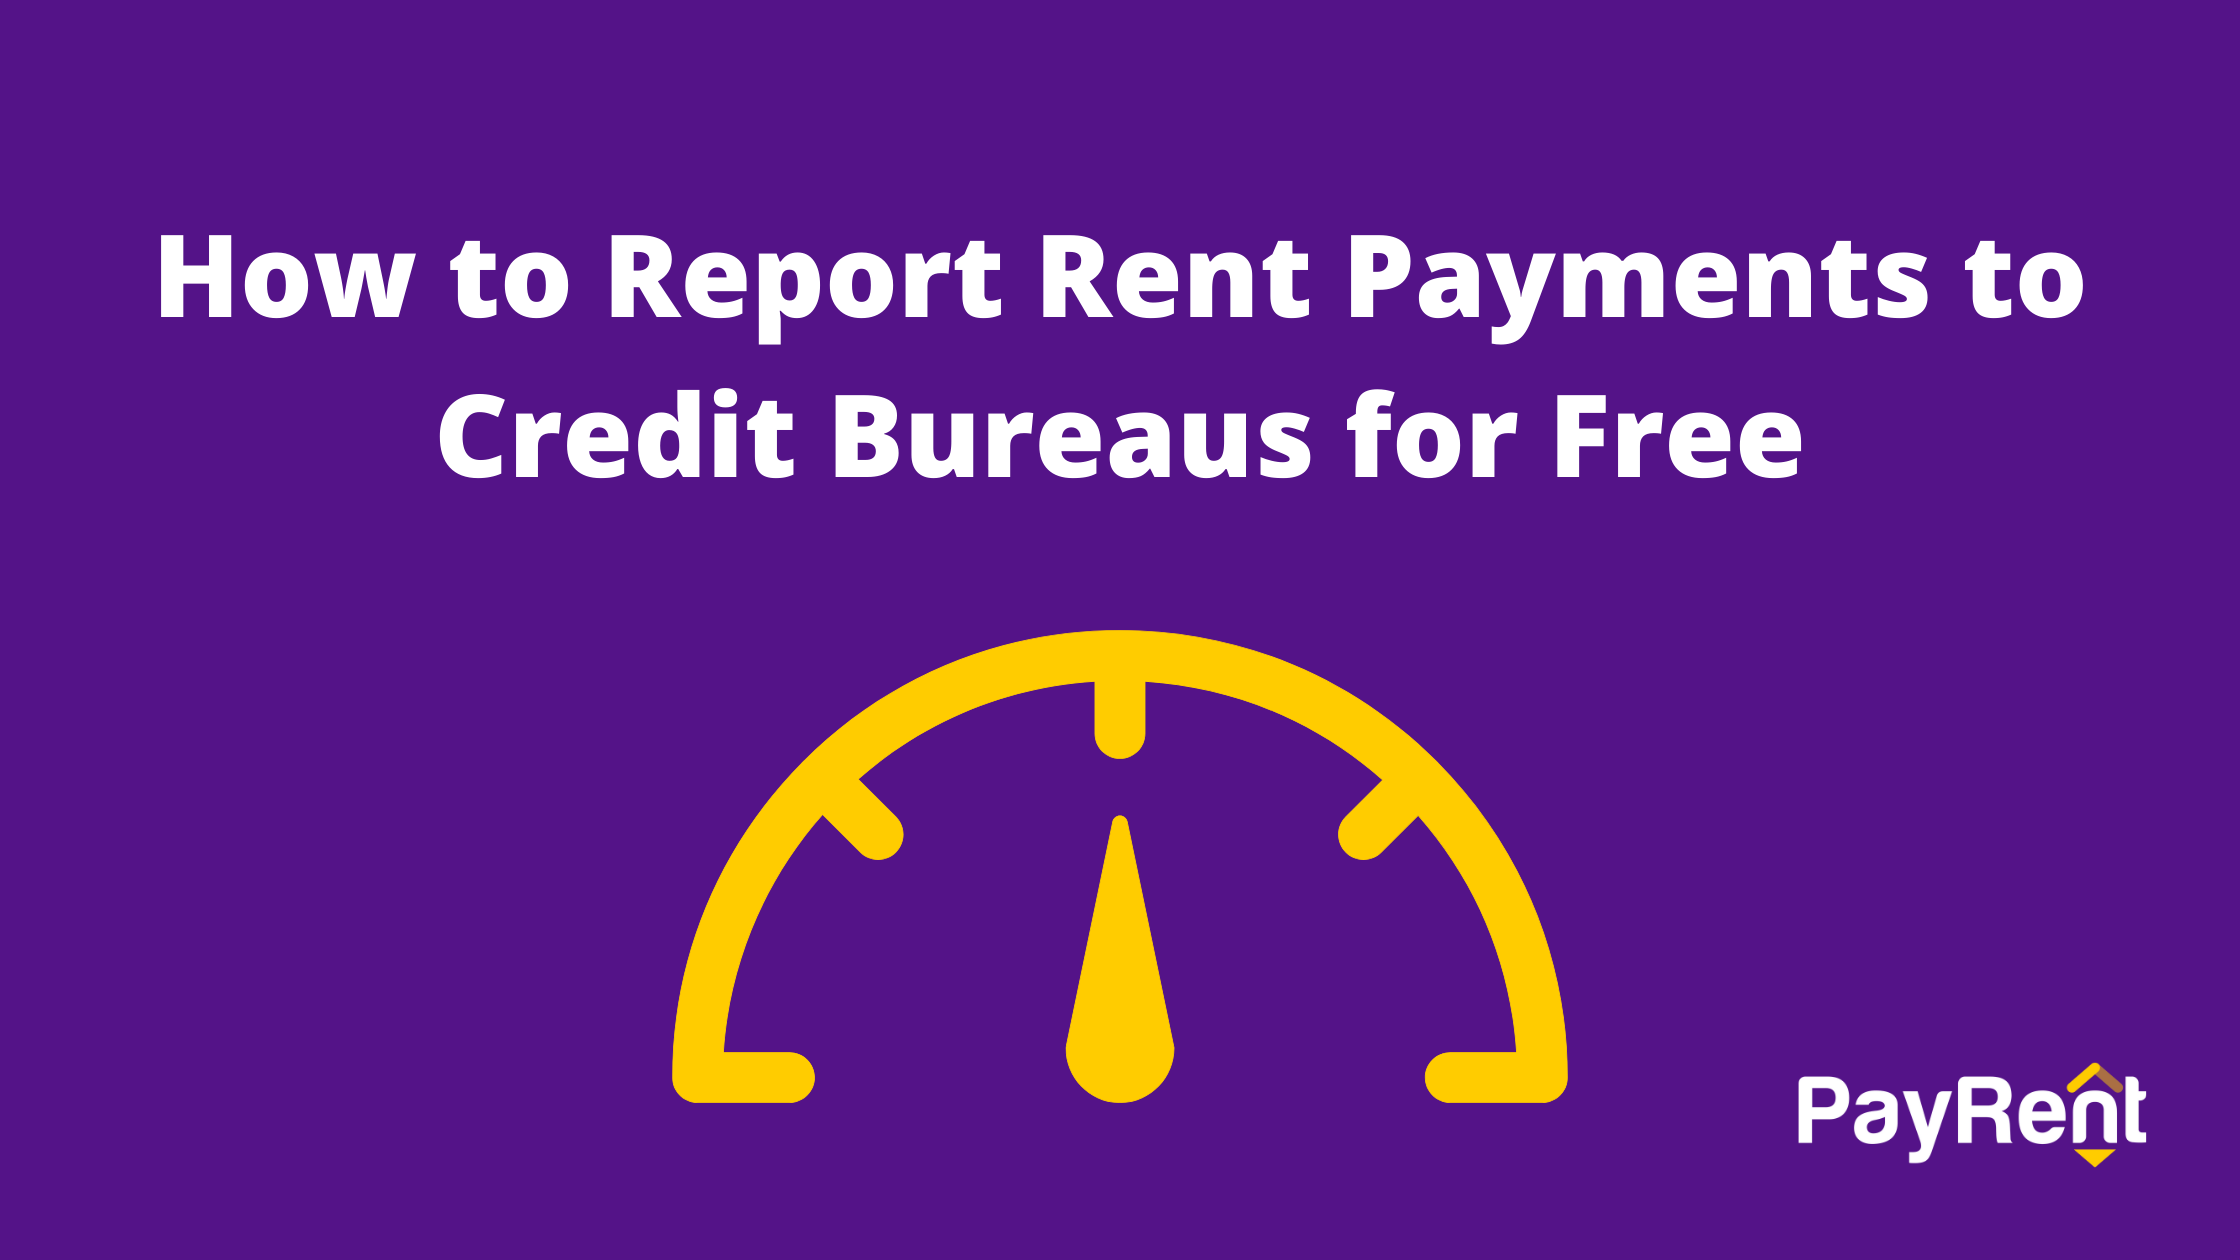 How to Report Rent Payments to Credit Bureaus for Free, Report Rent Payments